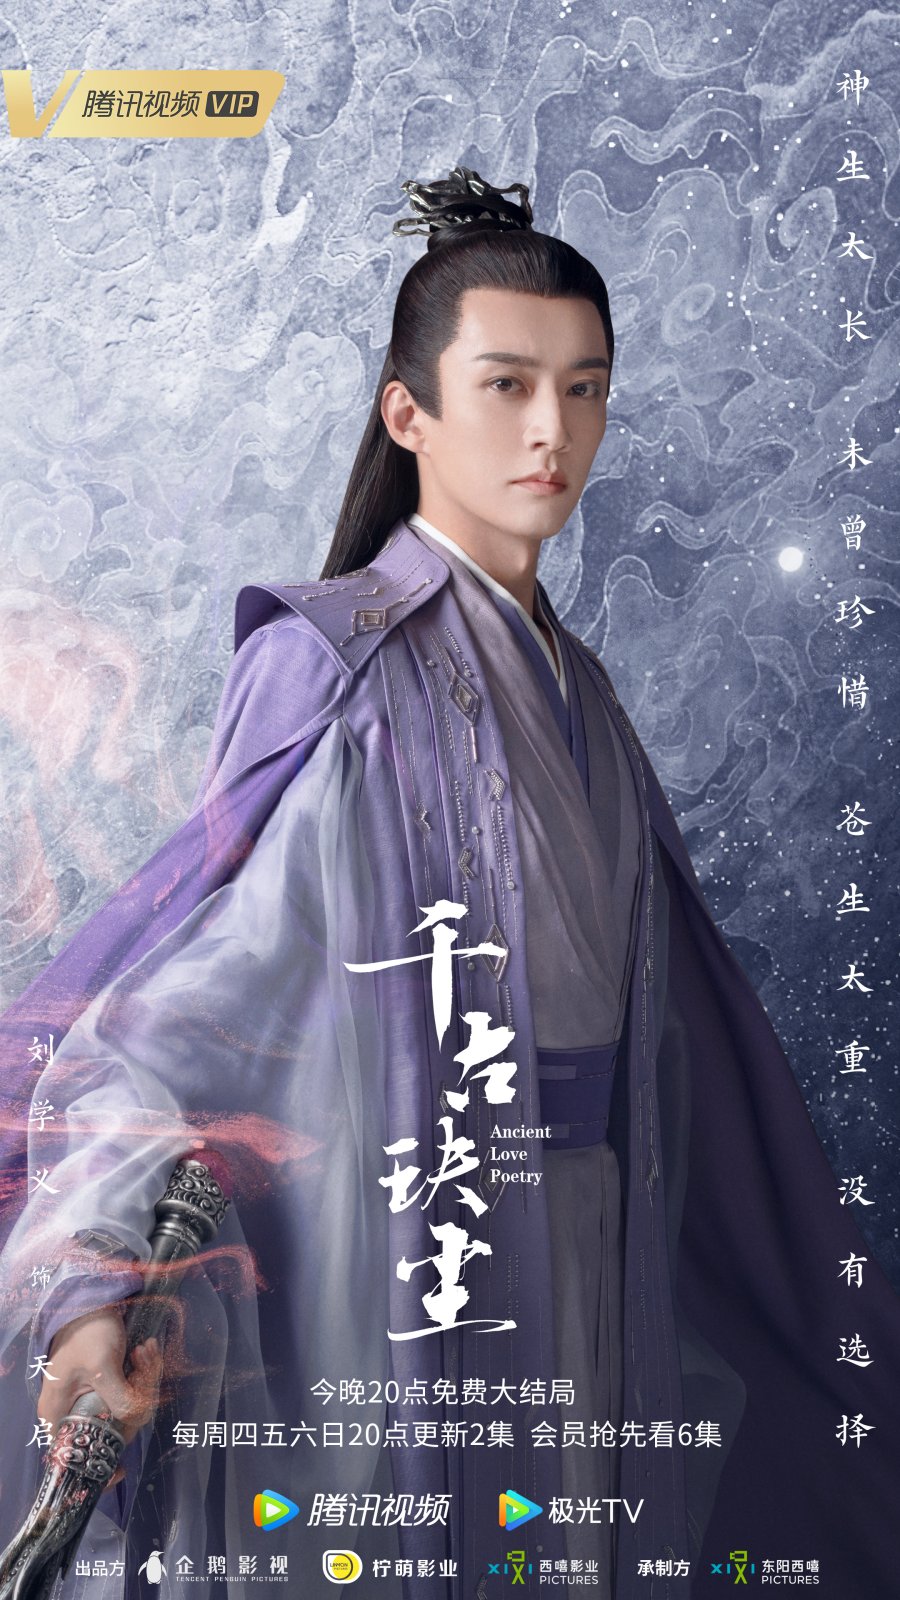 Ancient Love Poetry - Tian Qi (Ancient Love Poetry) #2322271 - MyDramaList